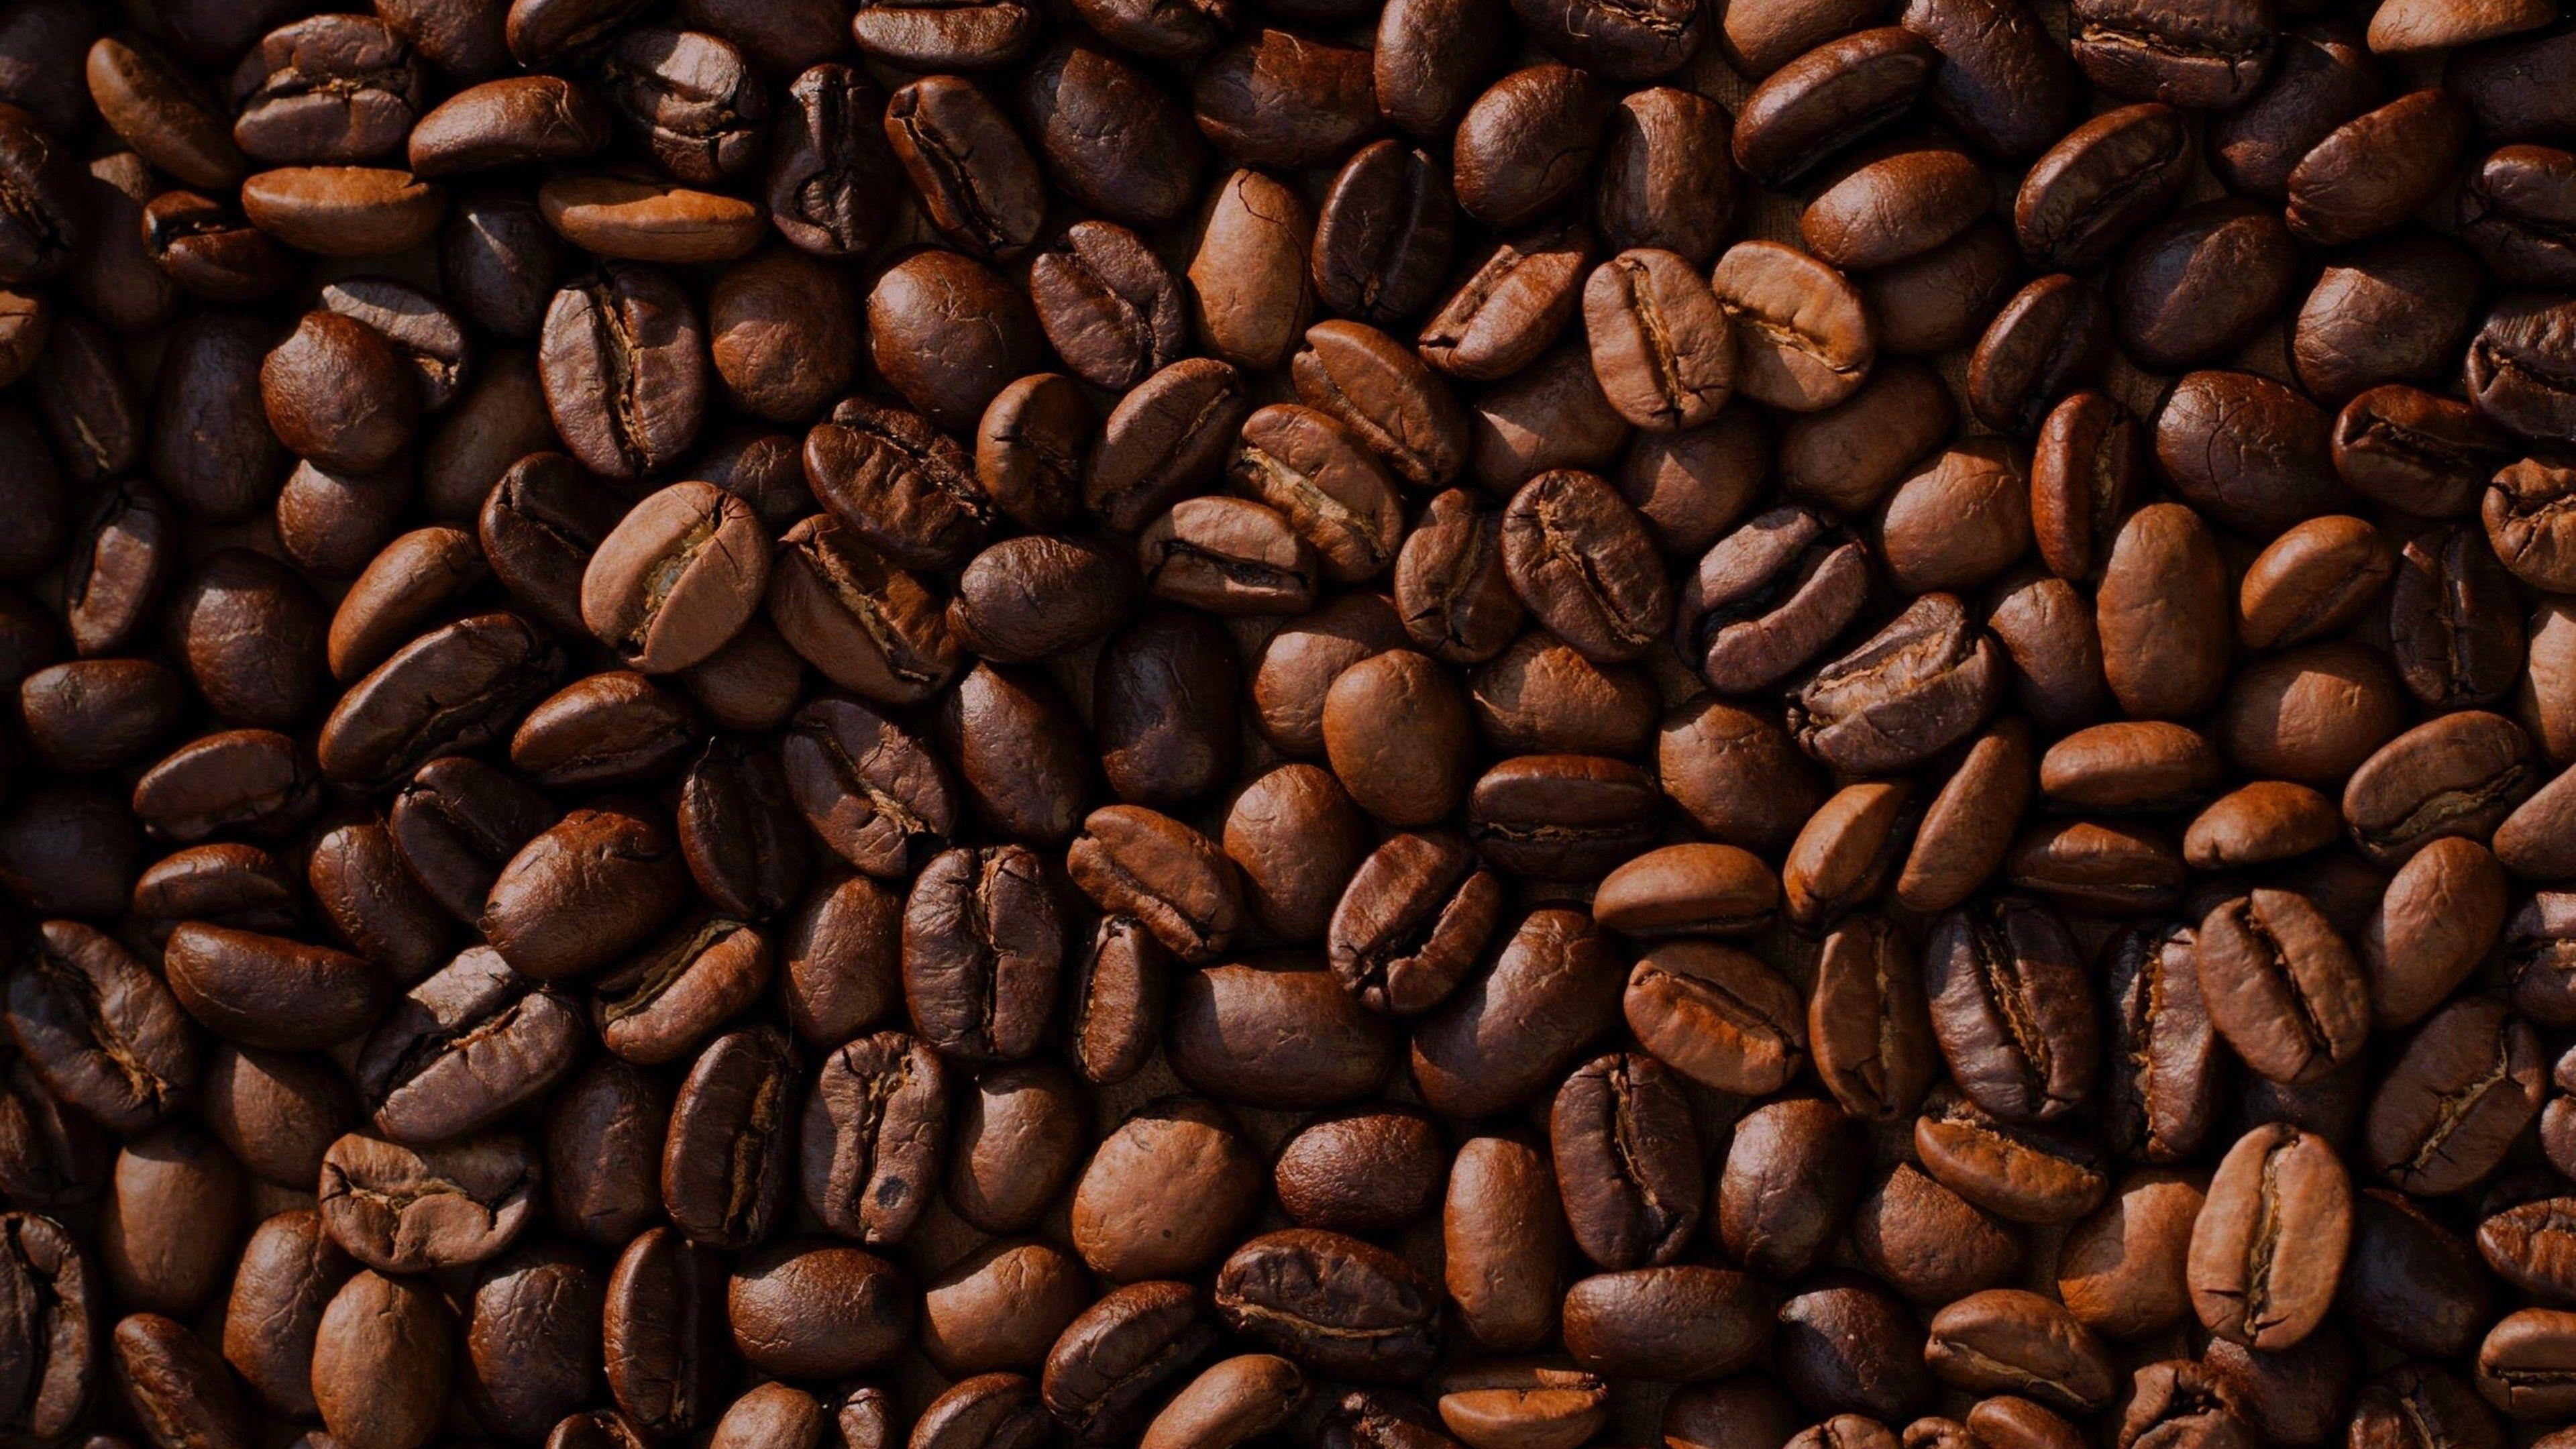 500 Coffee Bean Pictures  Download Free Images on Unsplash